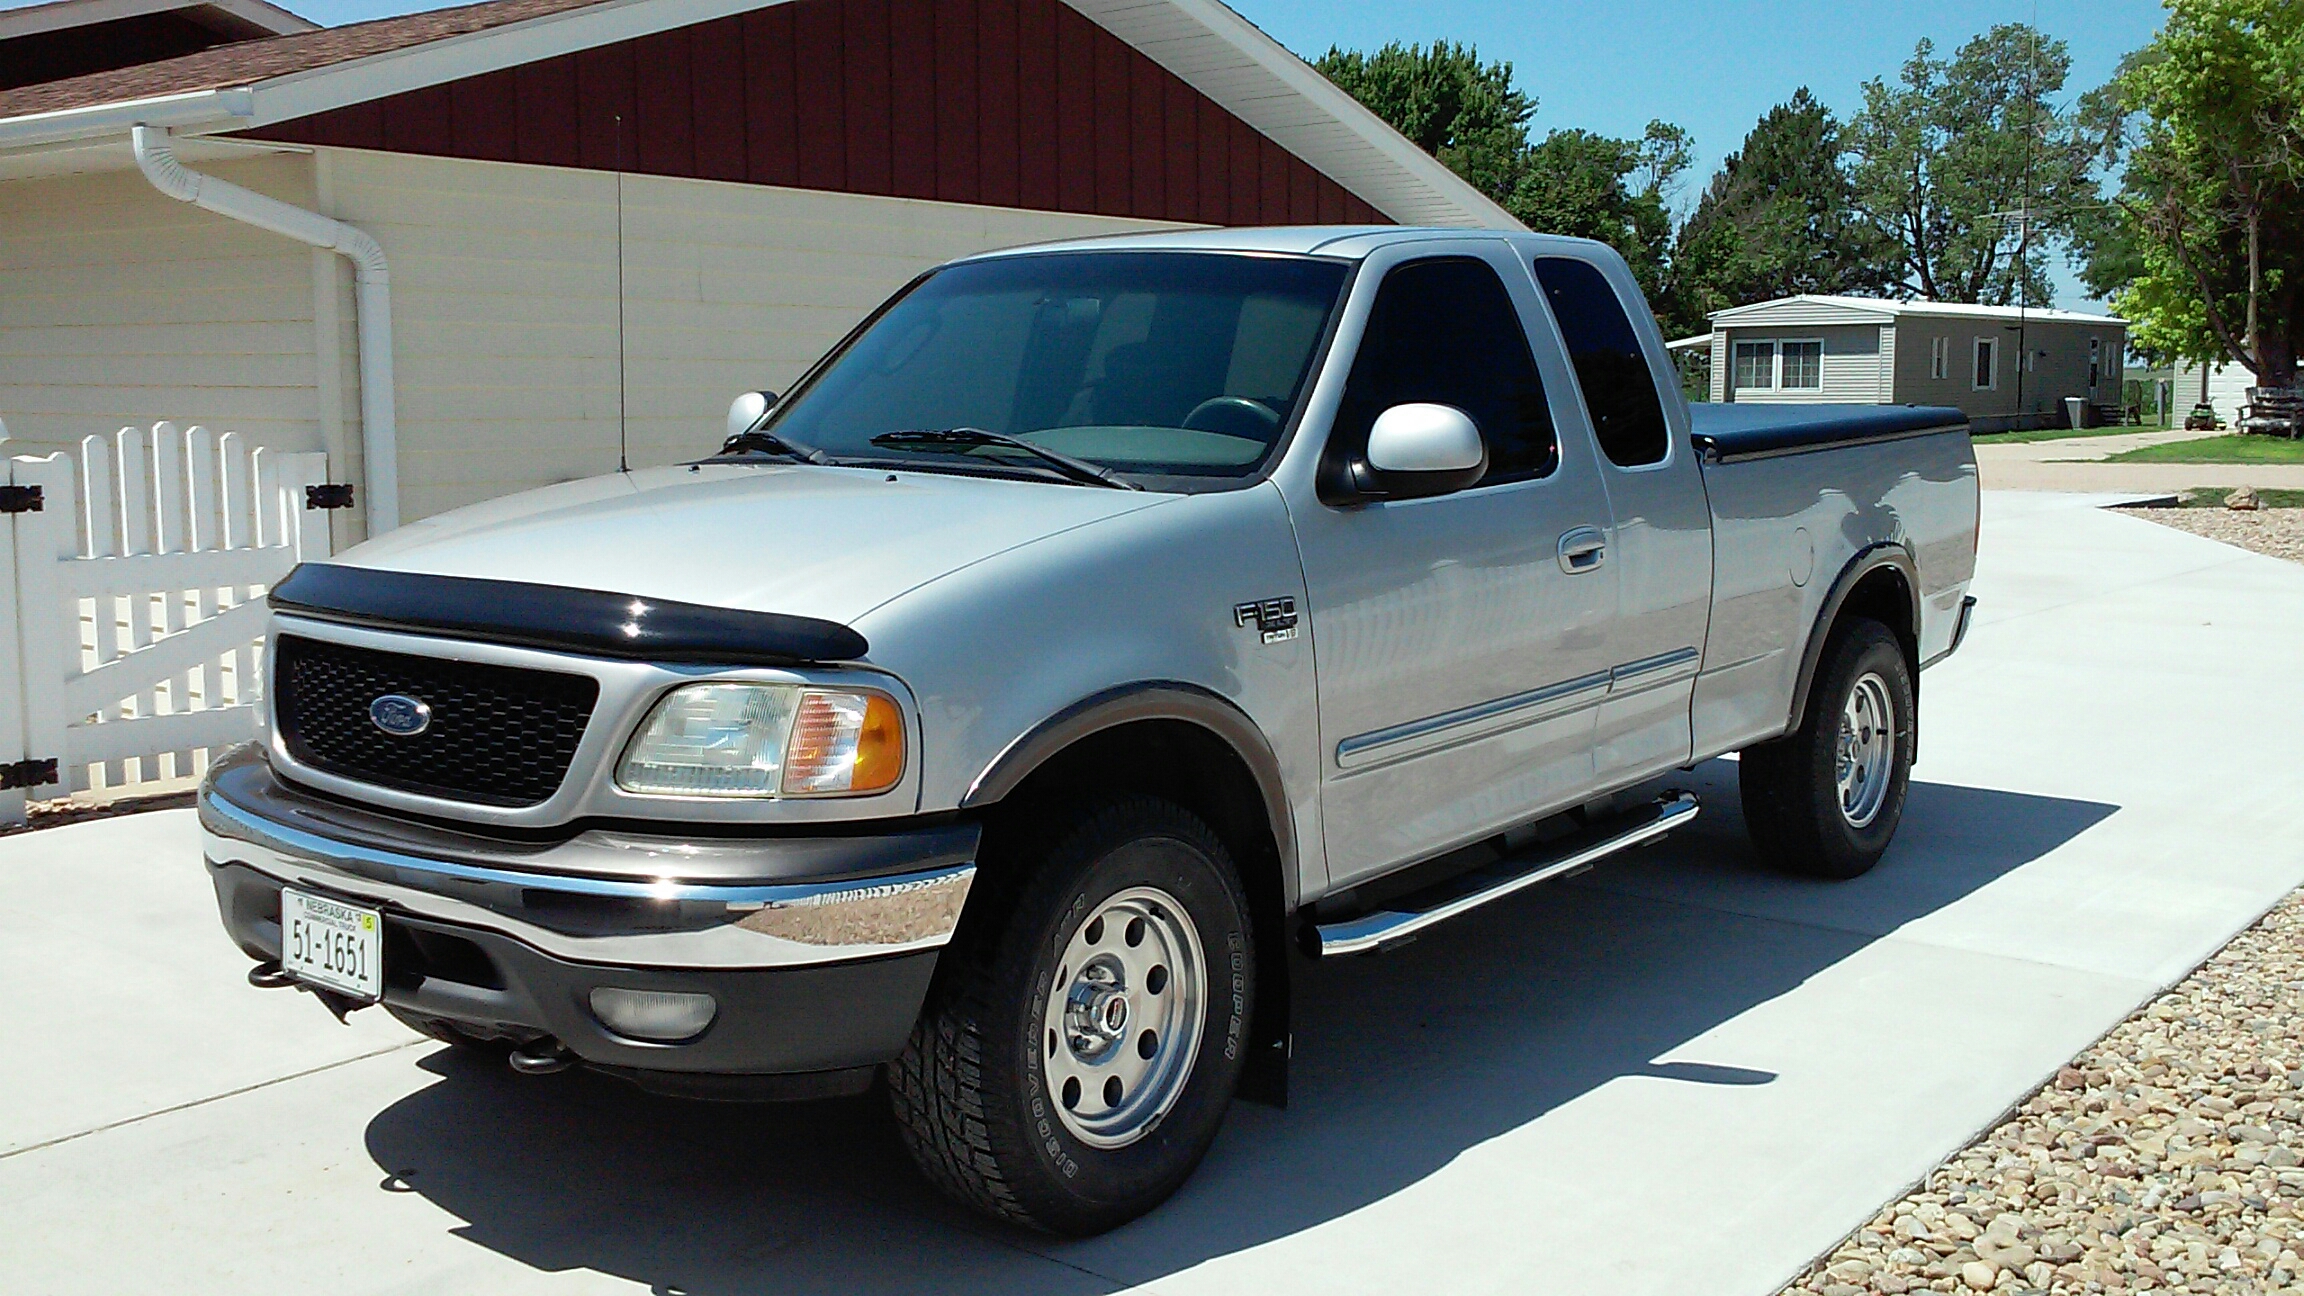 2006 ford f150 king ranch paint colors